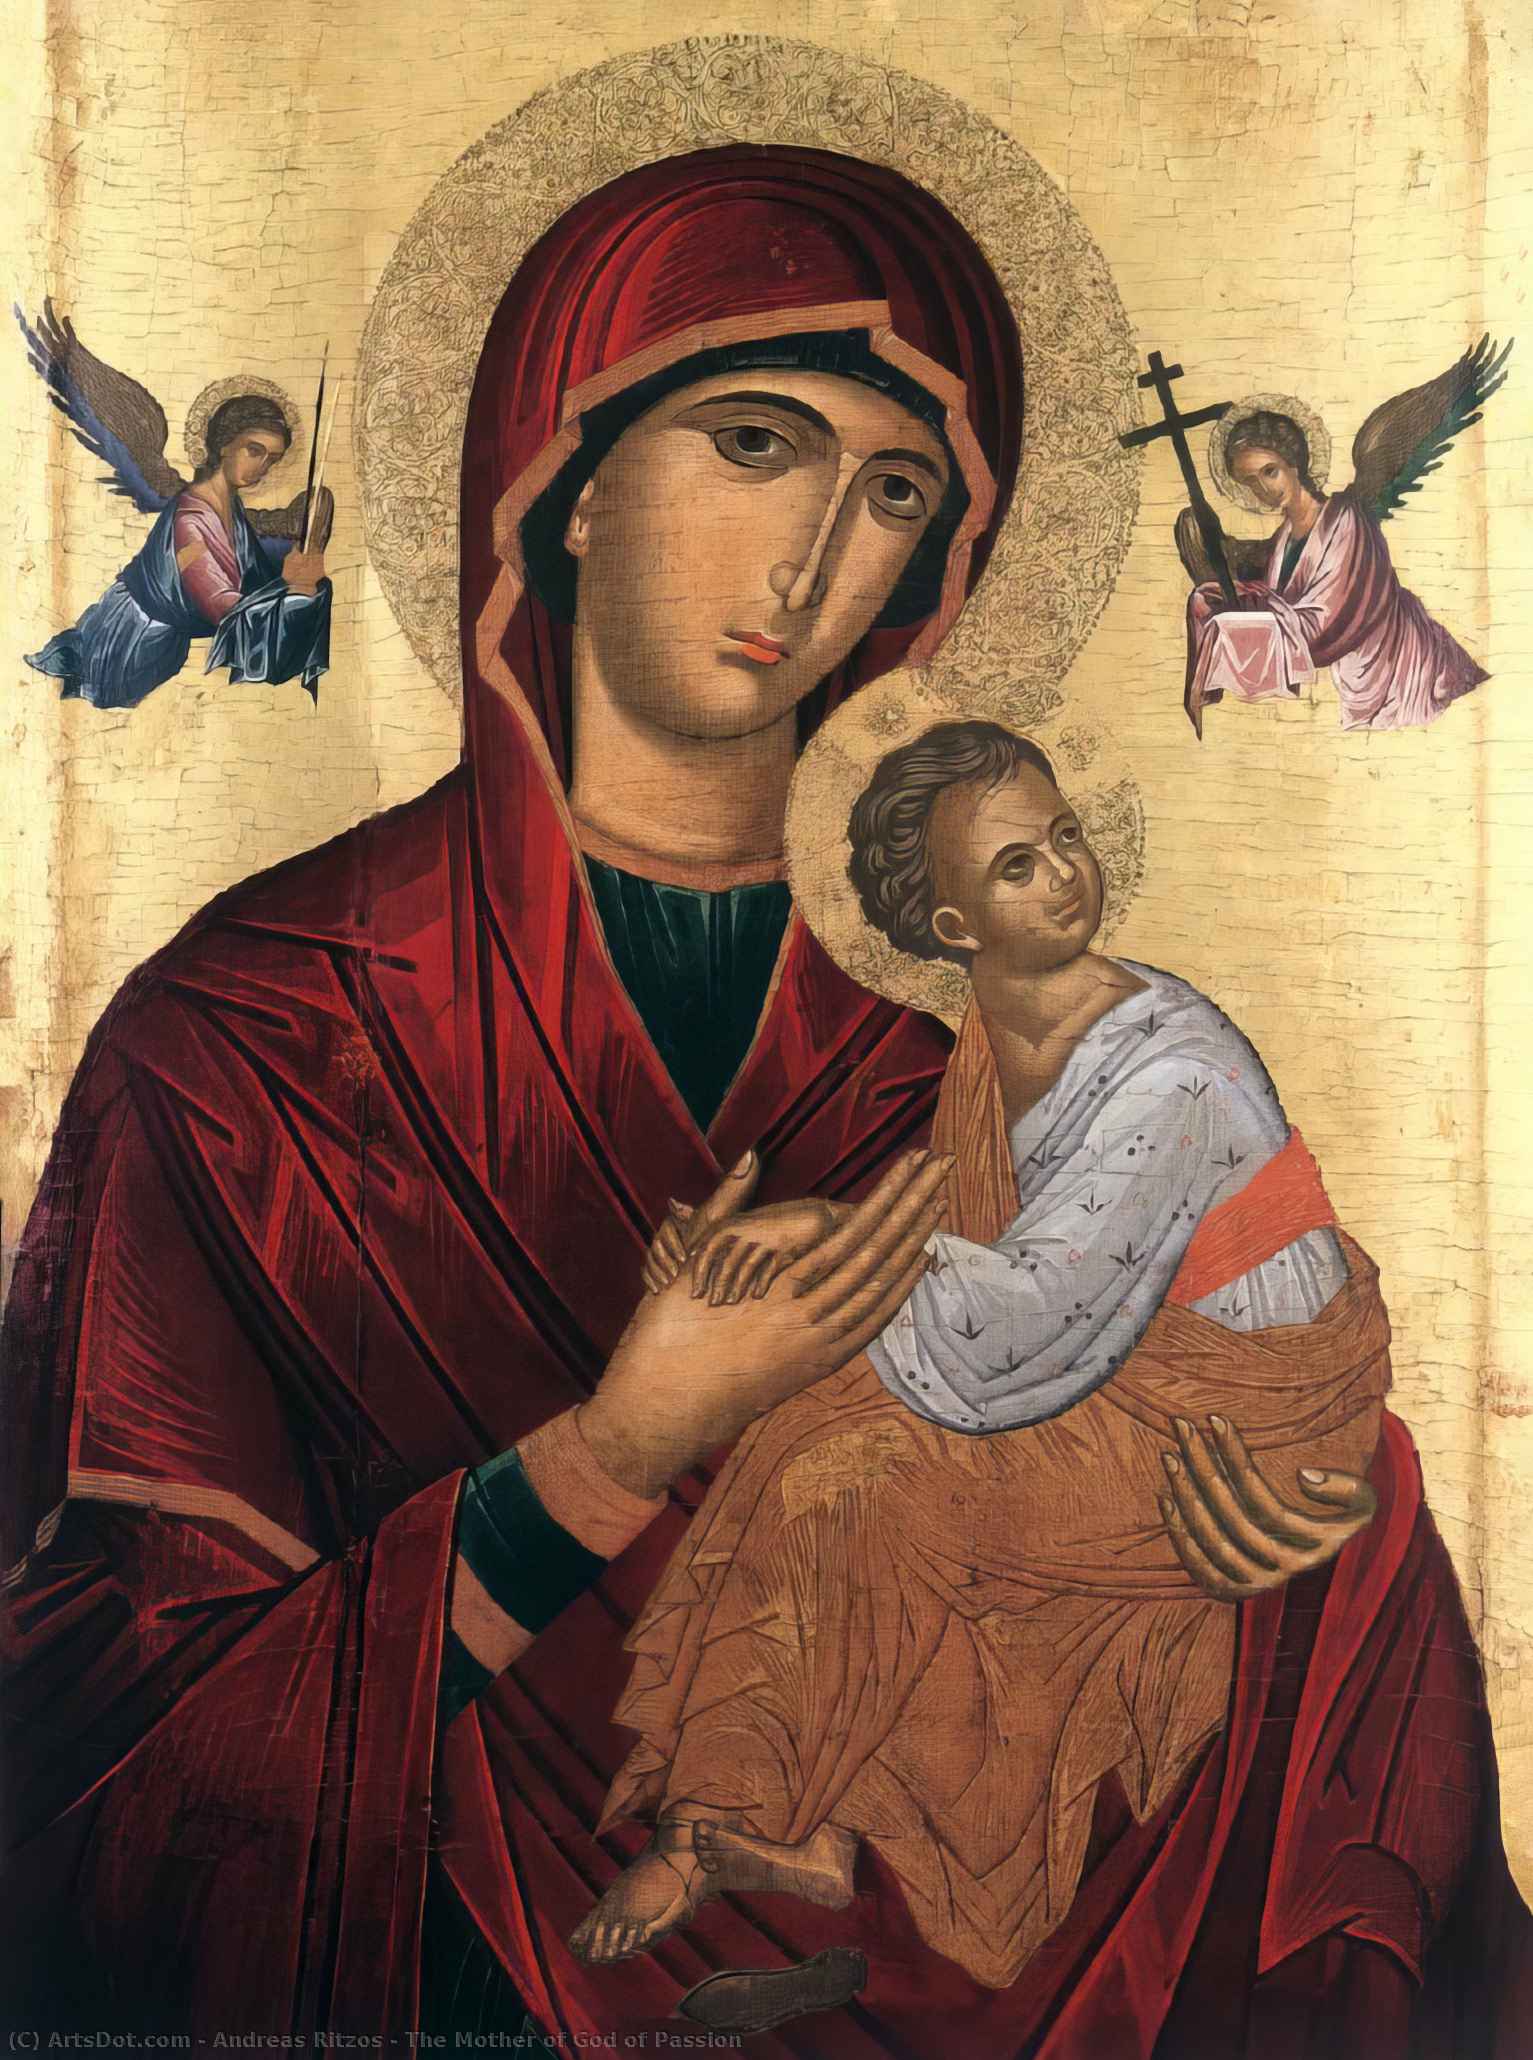 Order Artwork Replica The Mother of God of Passion, 1490 by Andreas Ritzos (1421-1492, Greece) | ArtsDot.com